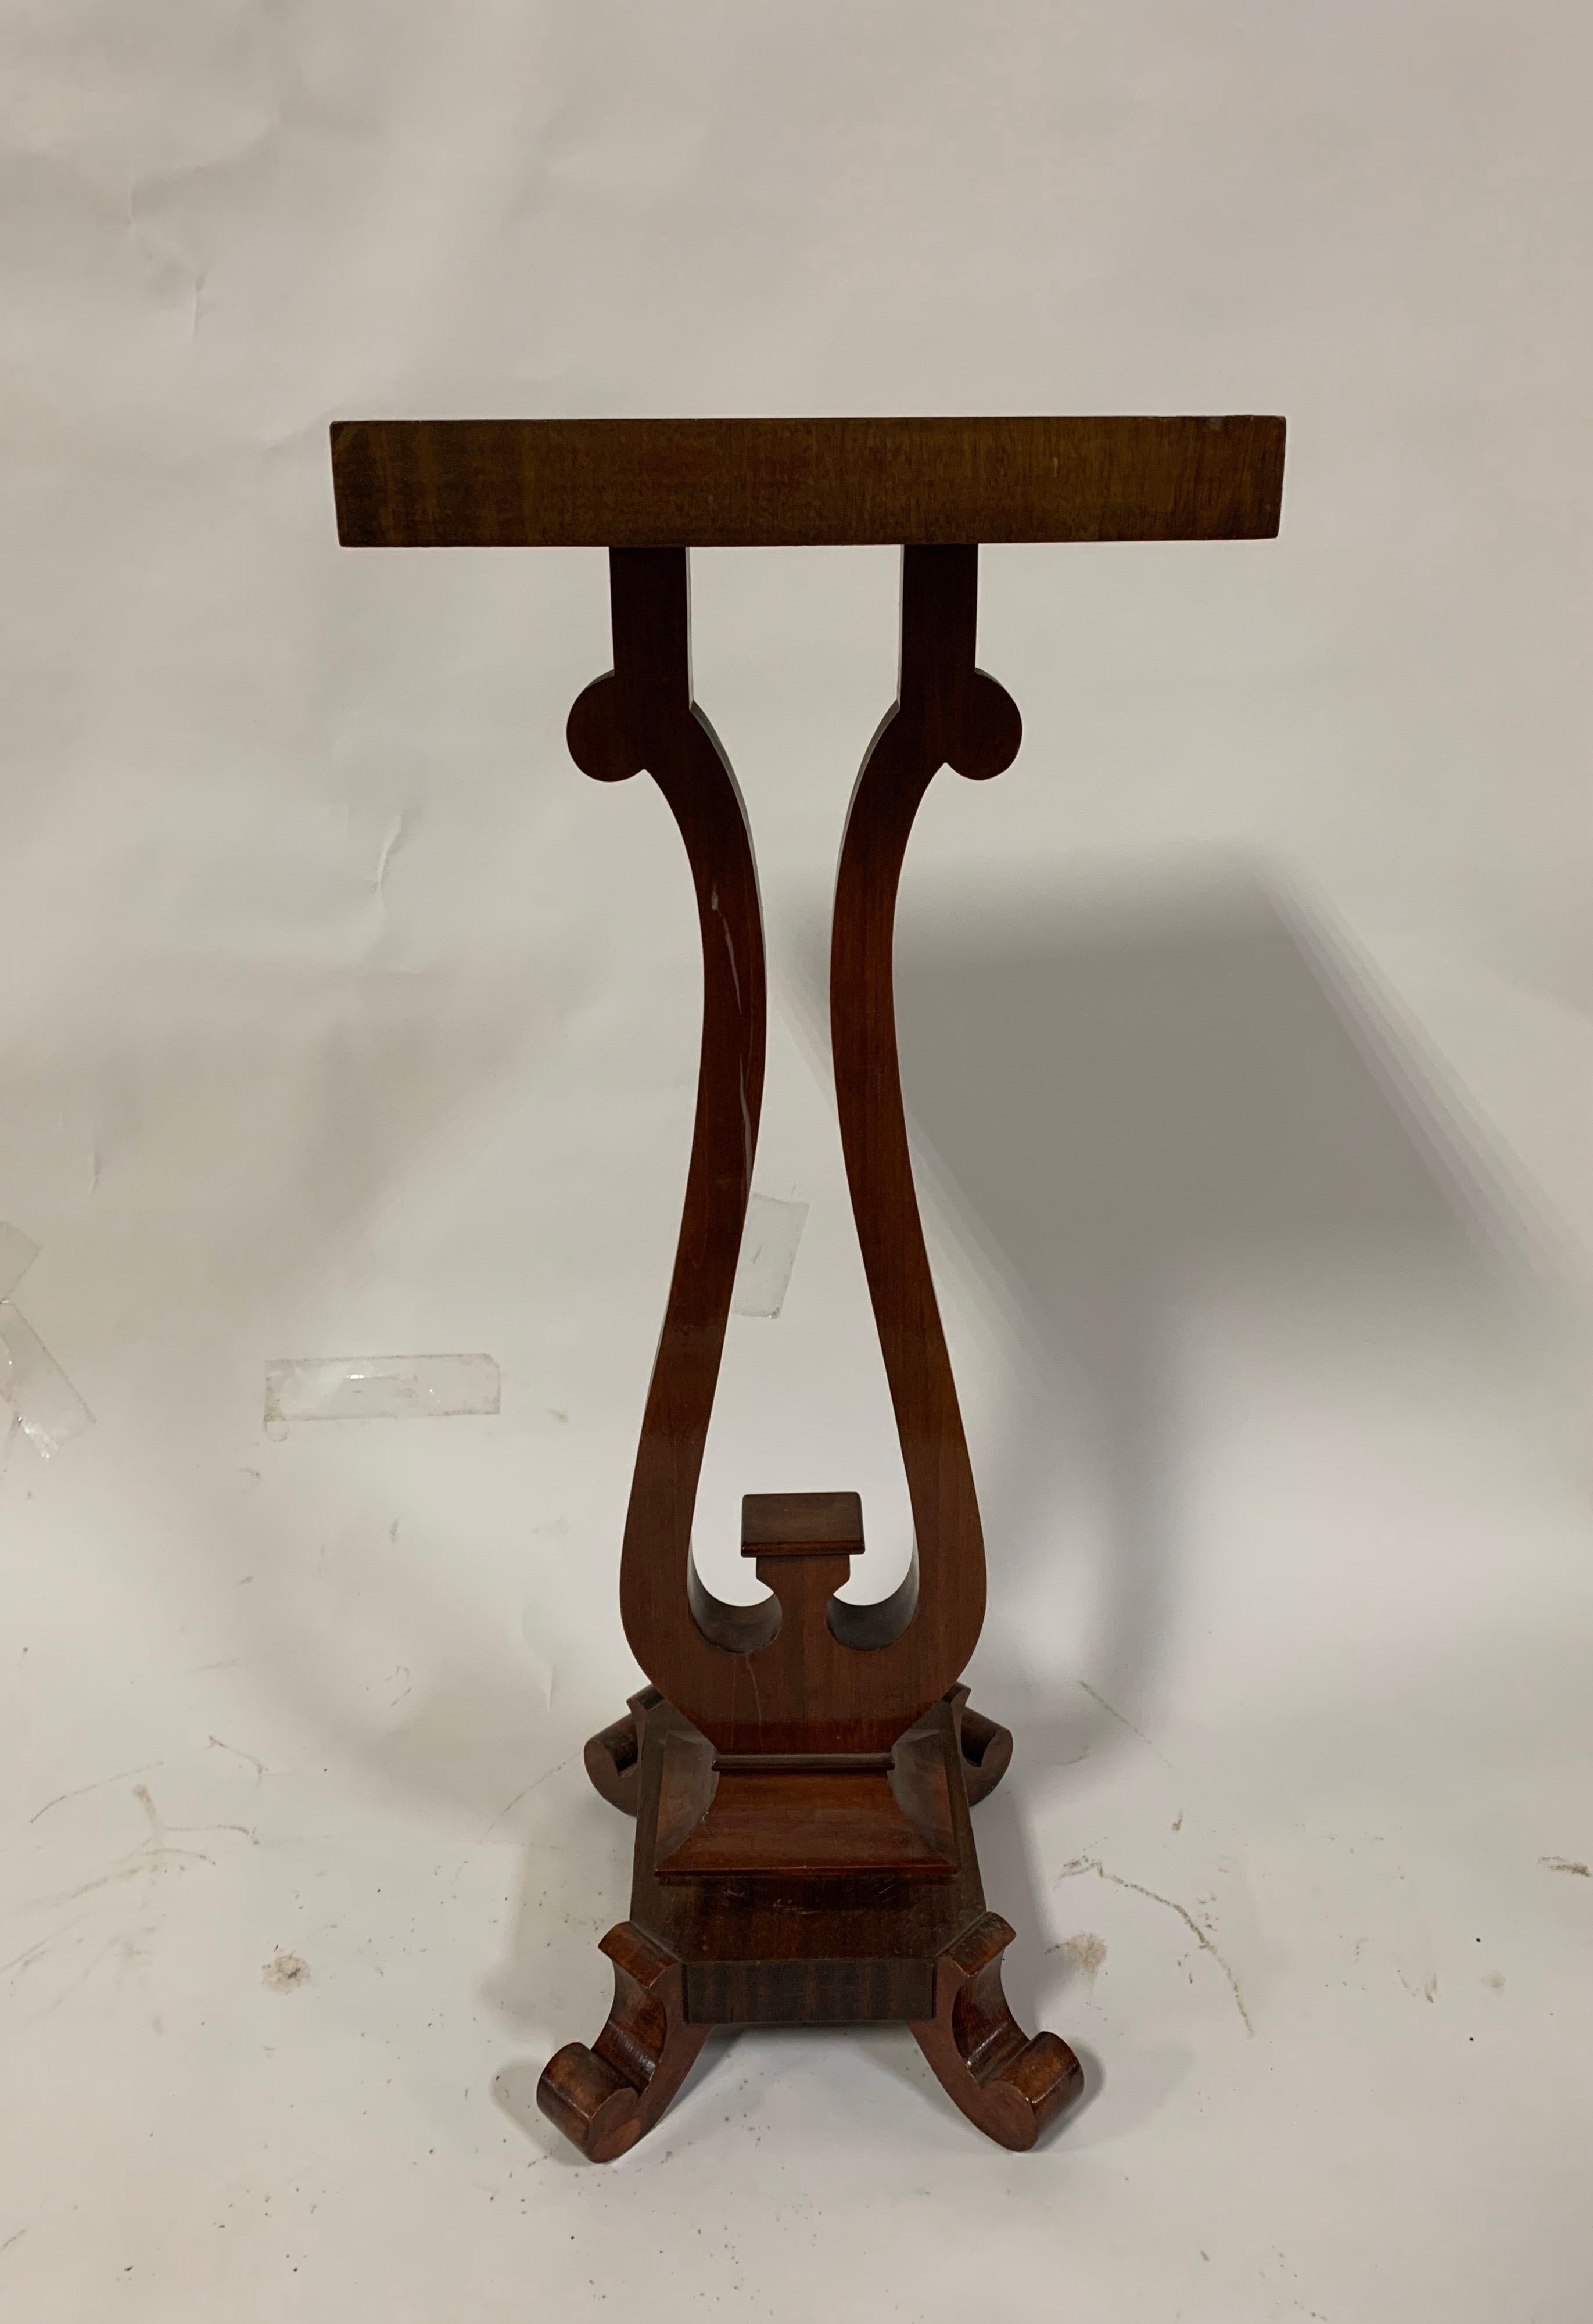 A mahogany pedestal or plant stand from the Empire Revival period, USA, circa 1920.